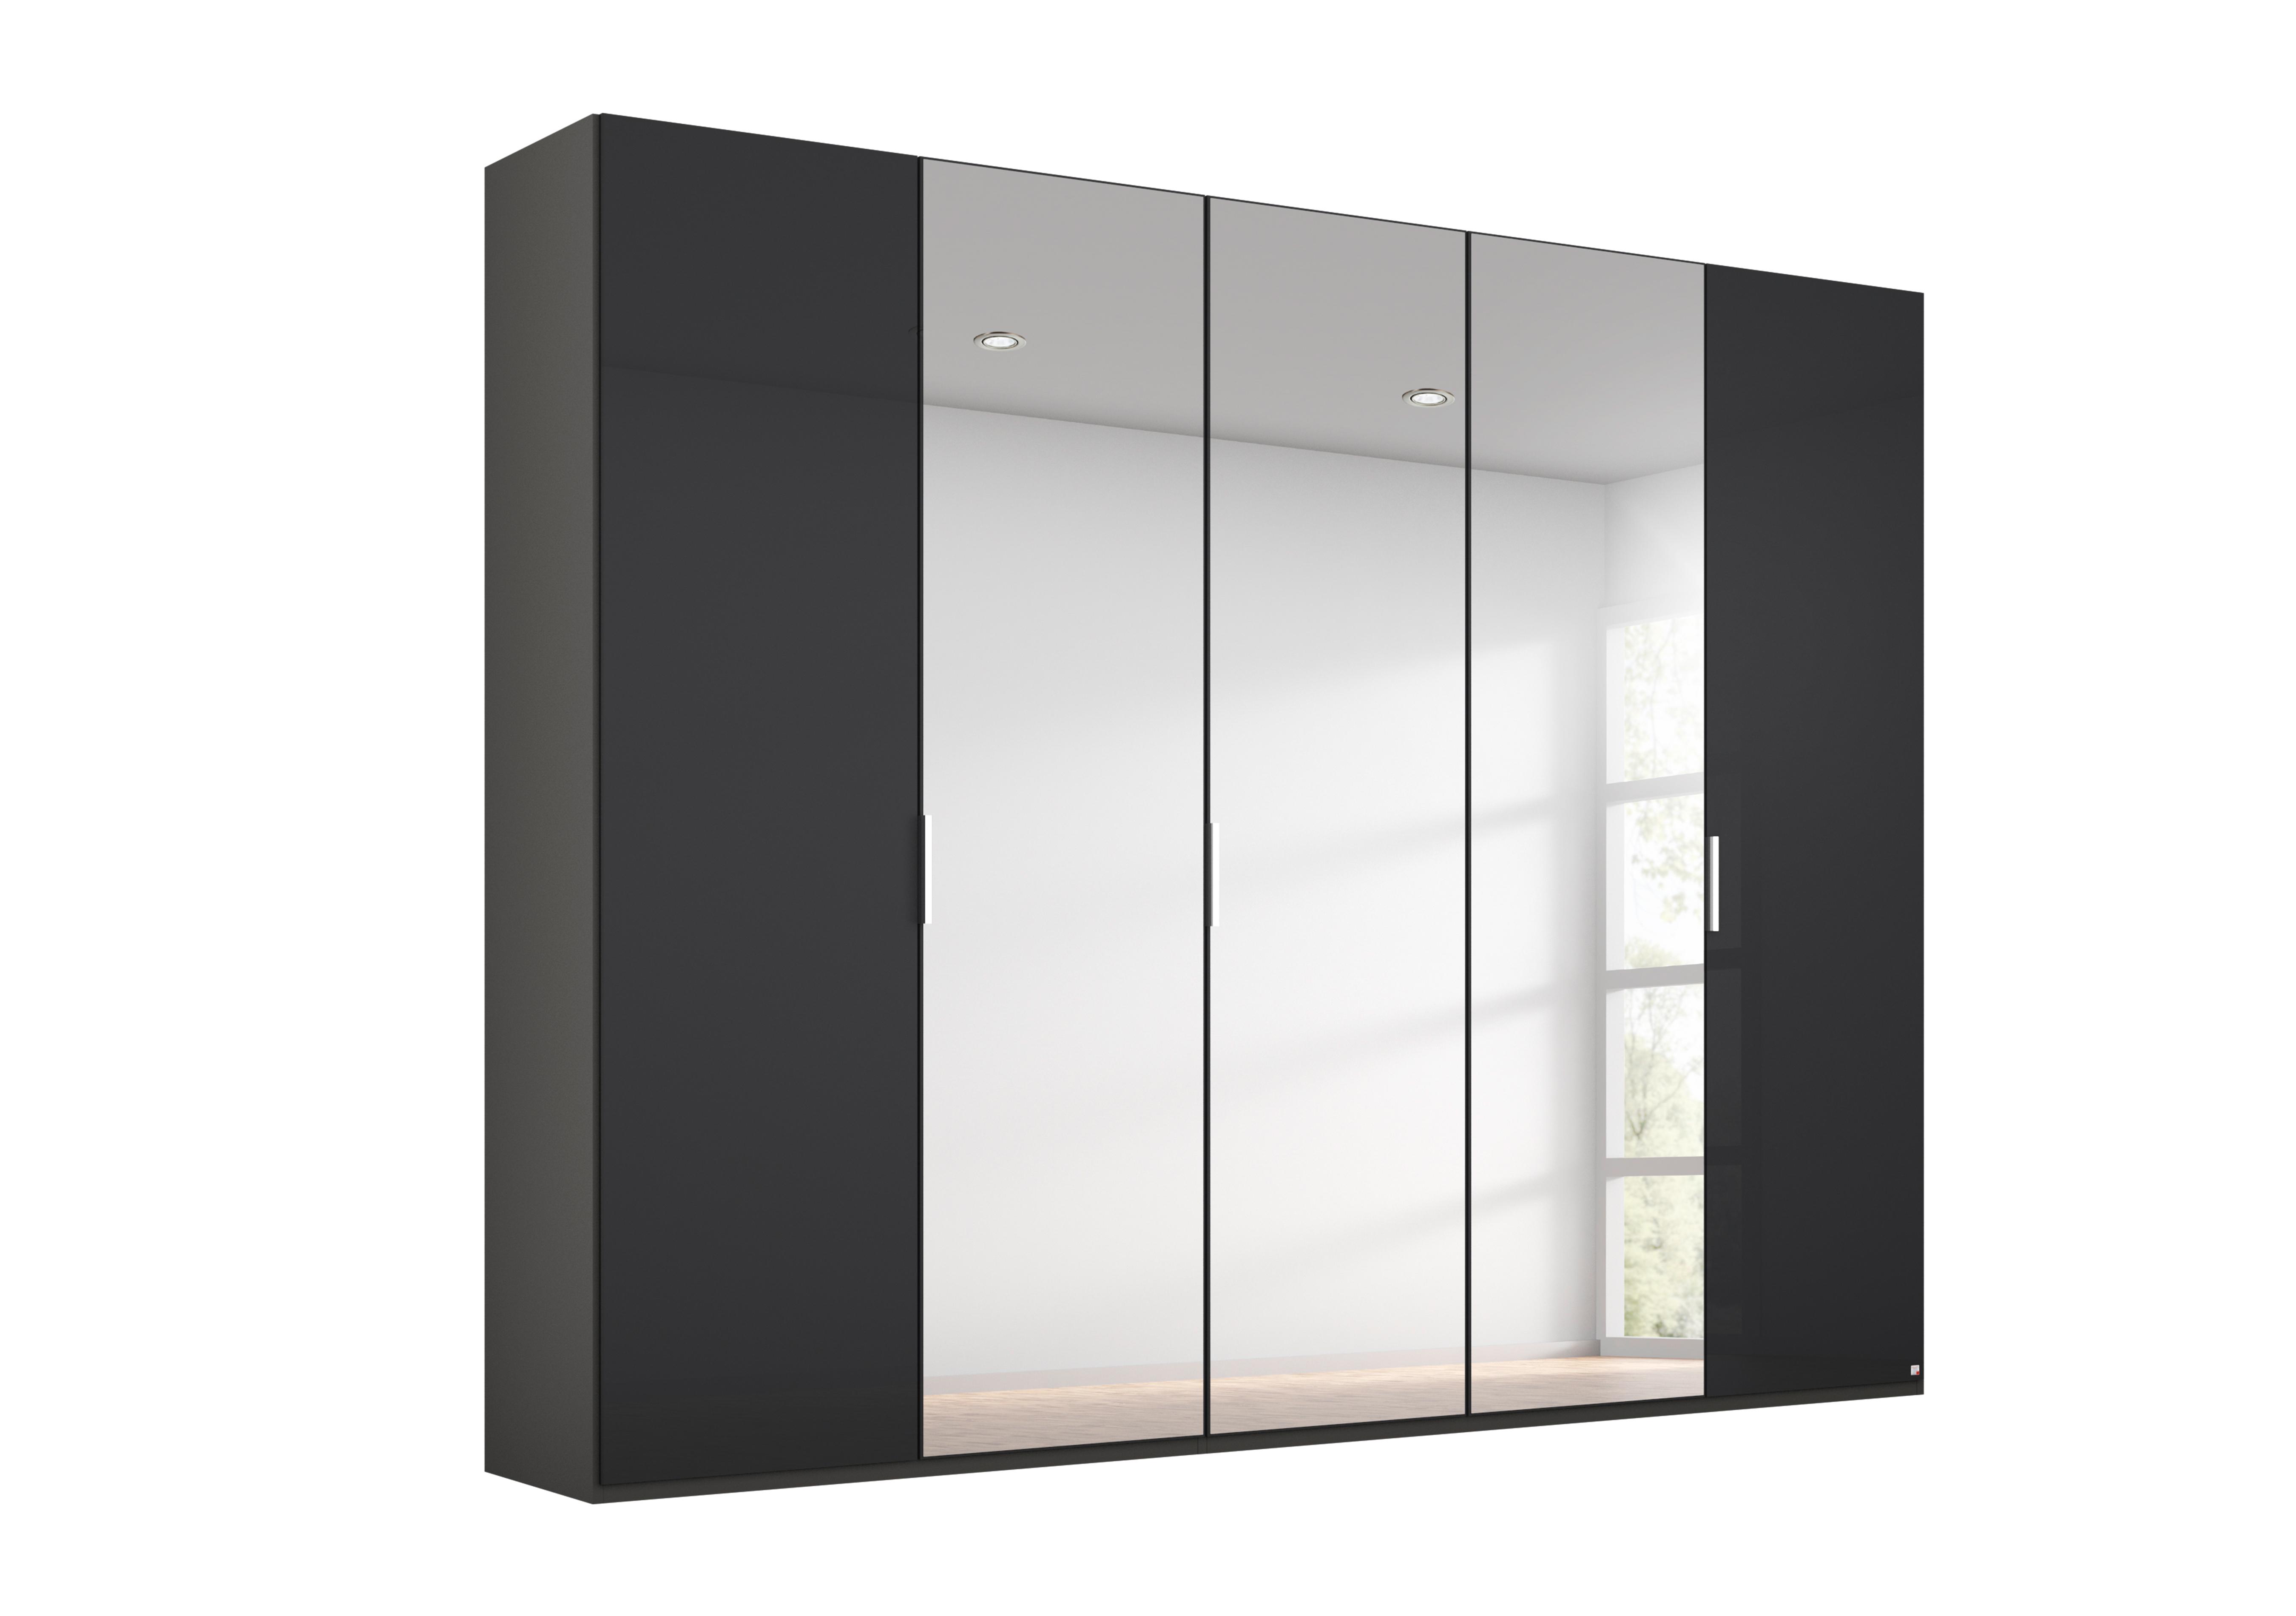 Formes Glass 5 Door Hinged Wardrobe with 3 Mirrors in A140b Graphite Basalt Front on Furniture Village